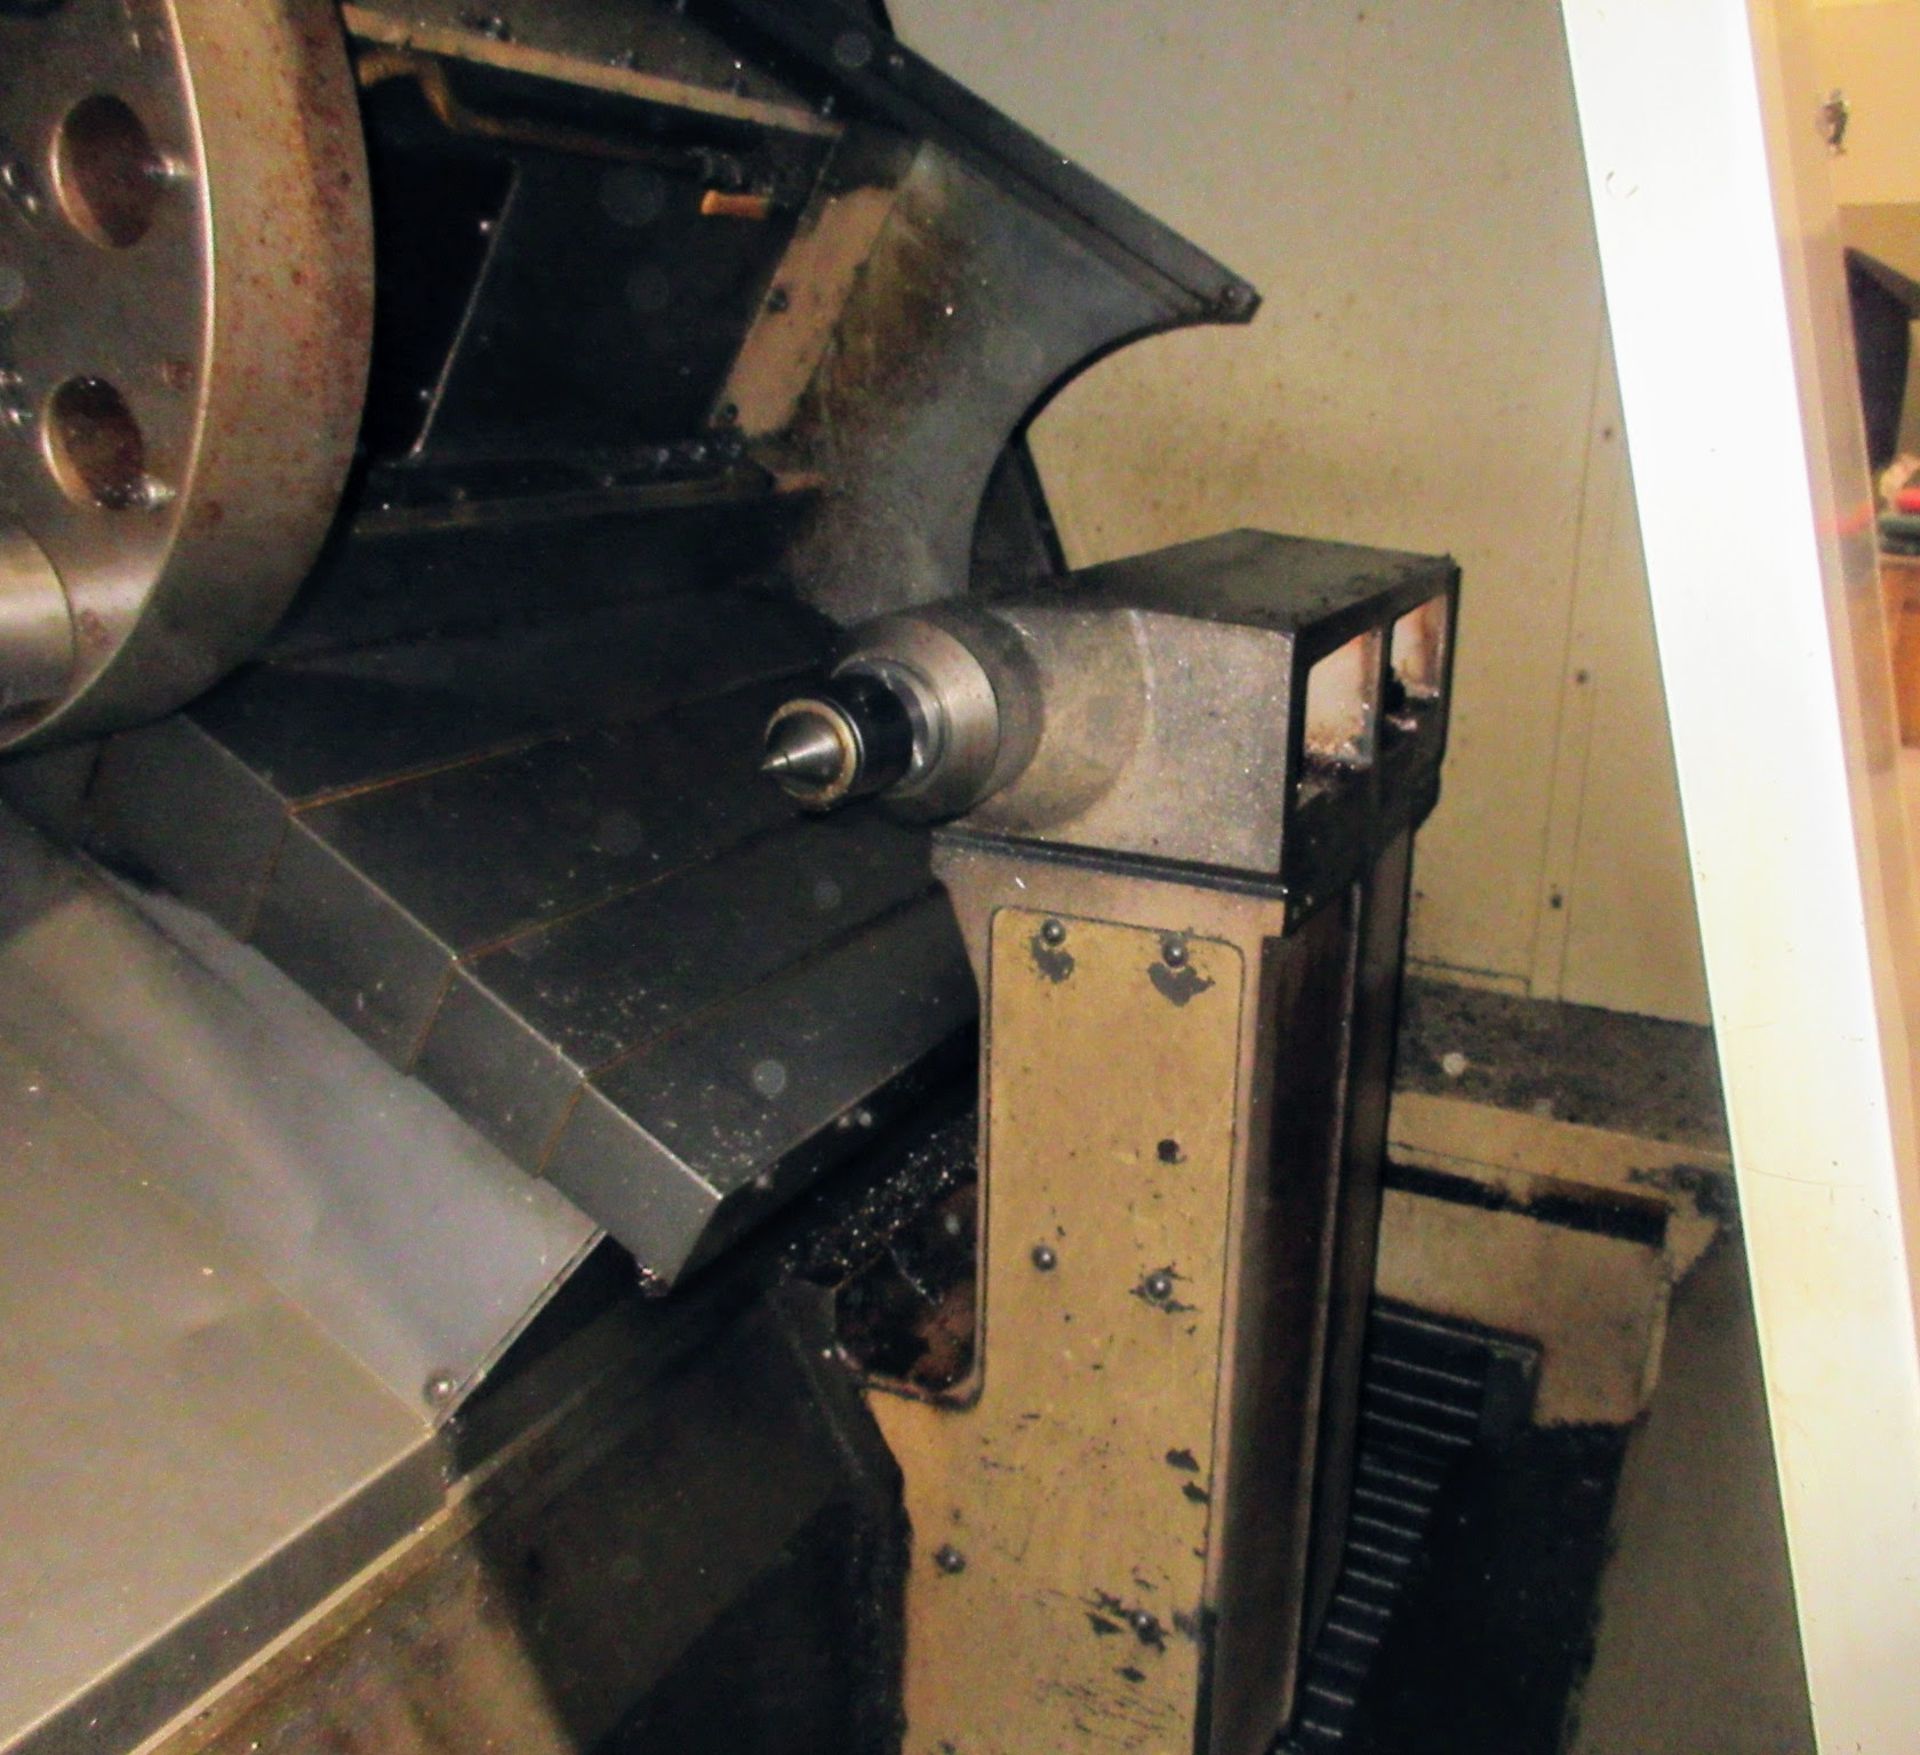 2000 HAAS SL-30T CNC LATHE, S/N 62806, CNC CONTROL, 10” 3-JAW CHUCK, TOOL PRESETTER, 12-STATION - Image 7 of 23